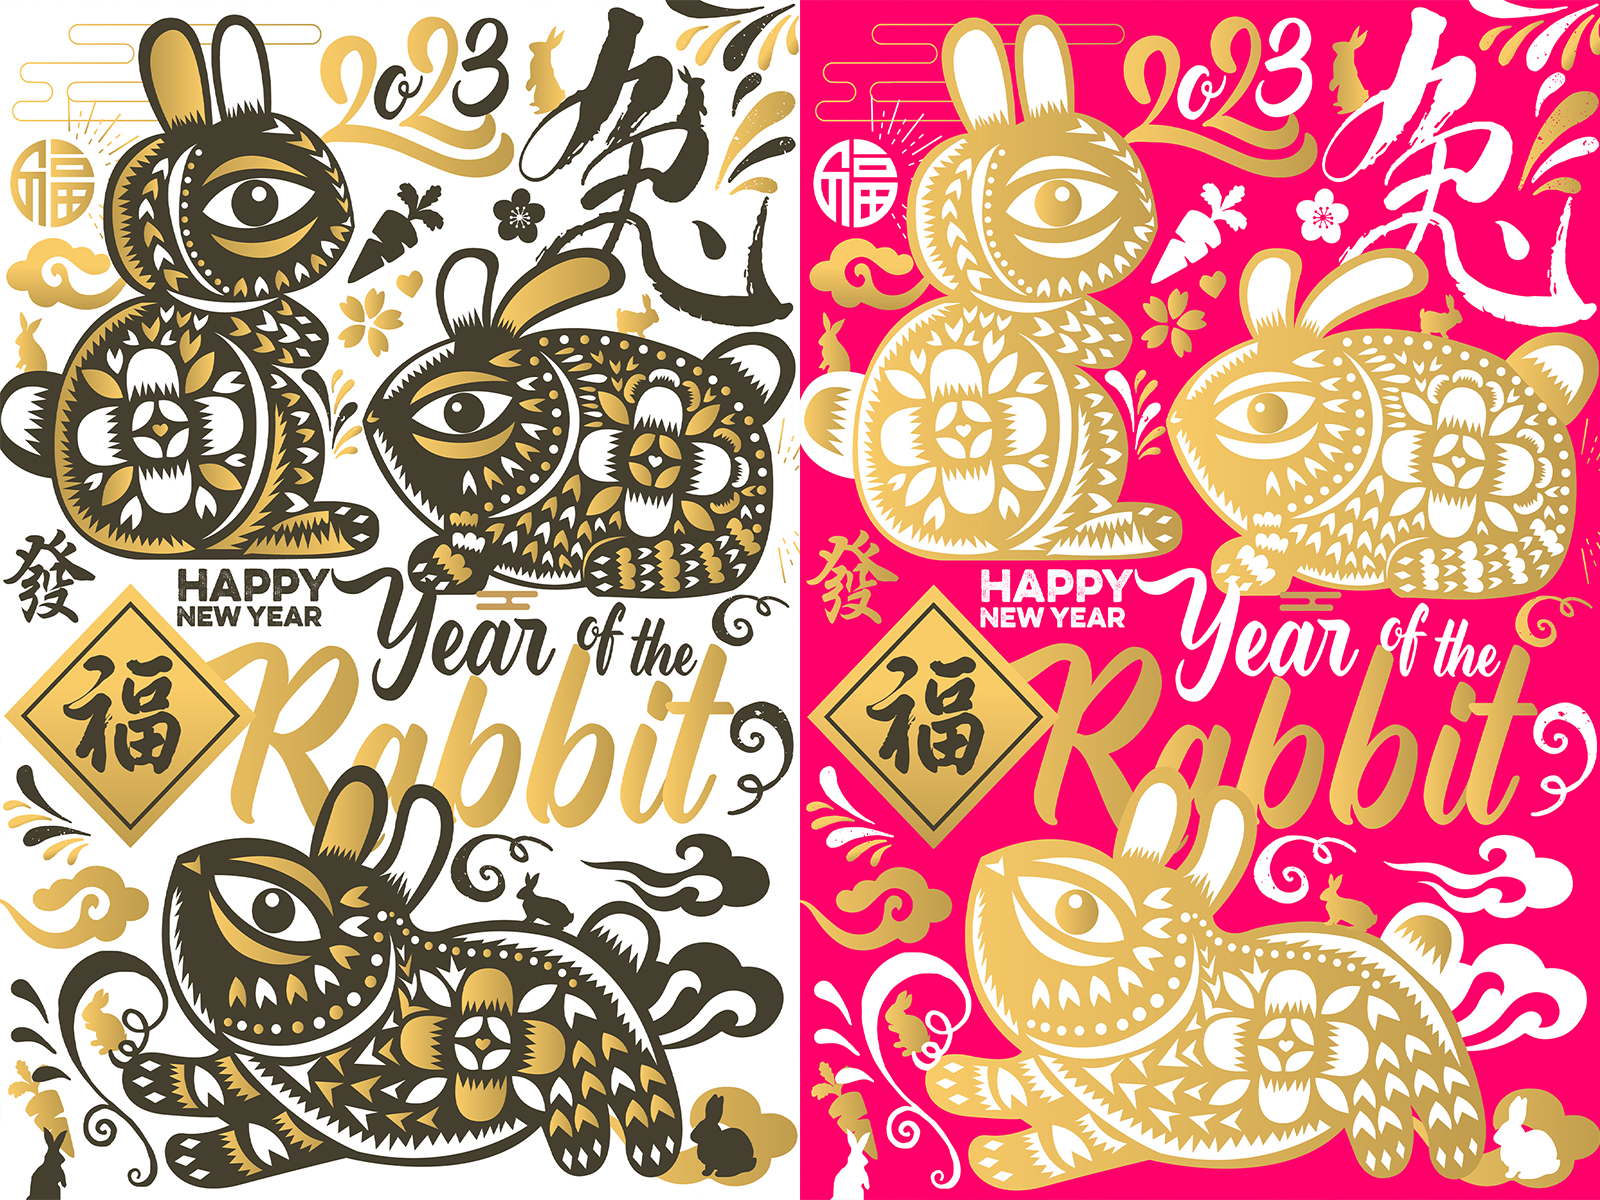 Chinese New year 2023. Year of rabbit. greeting card template with